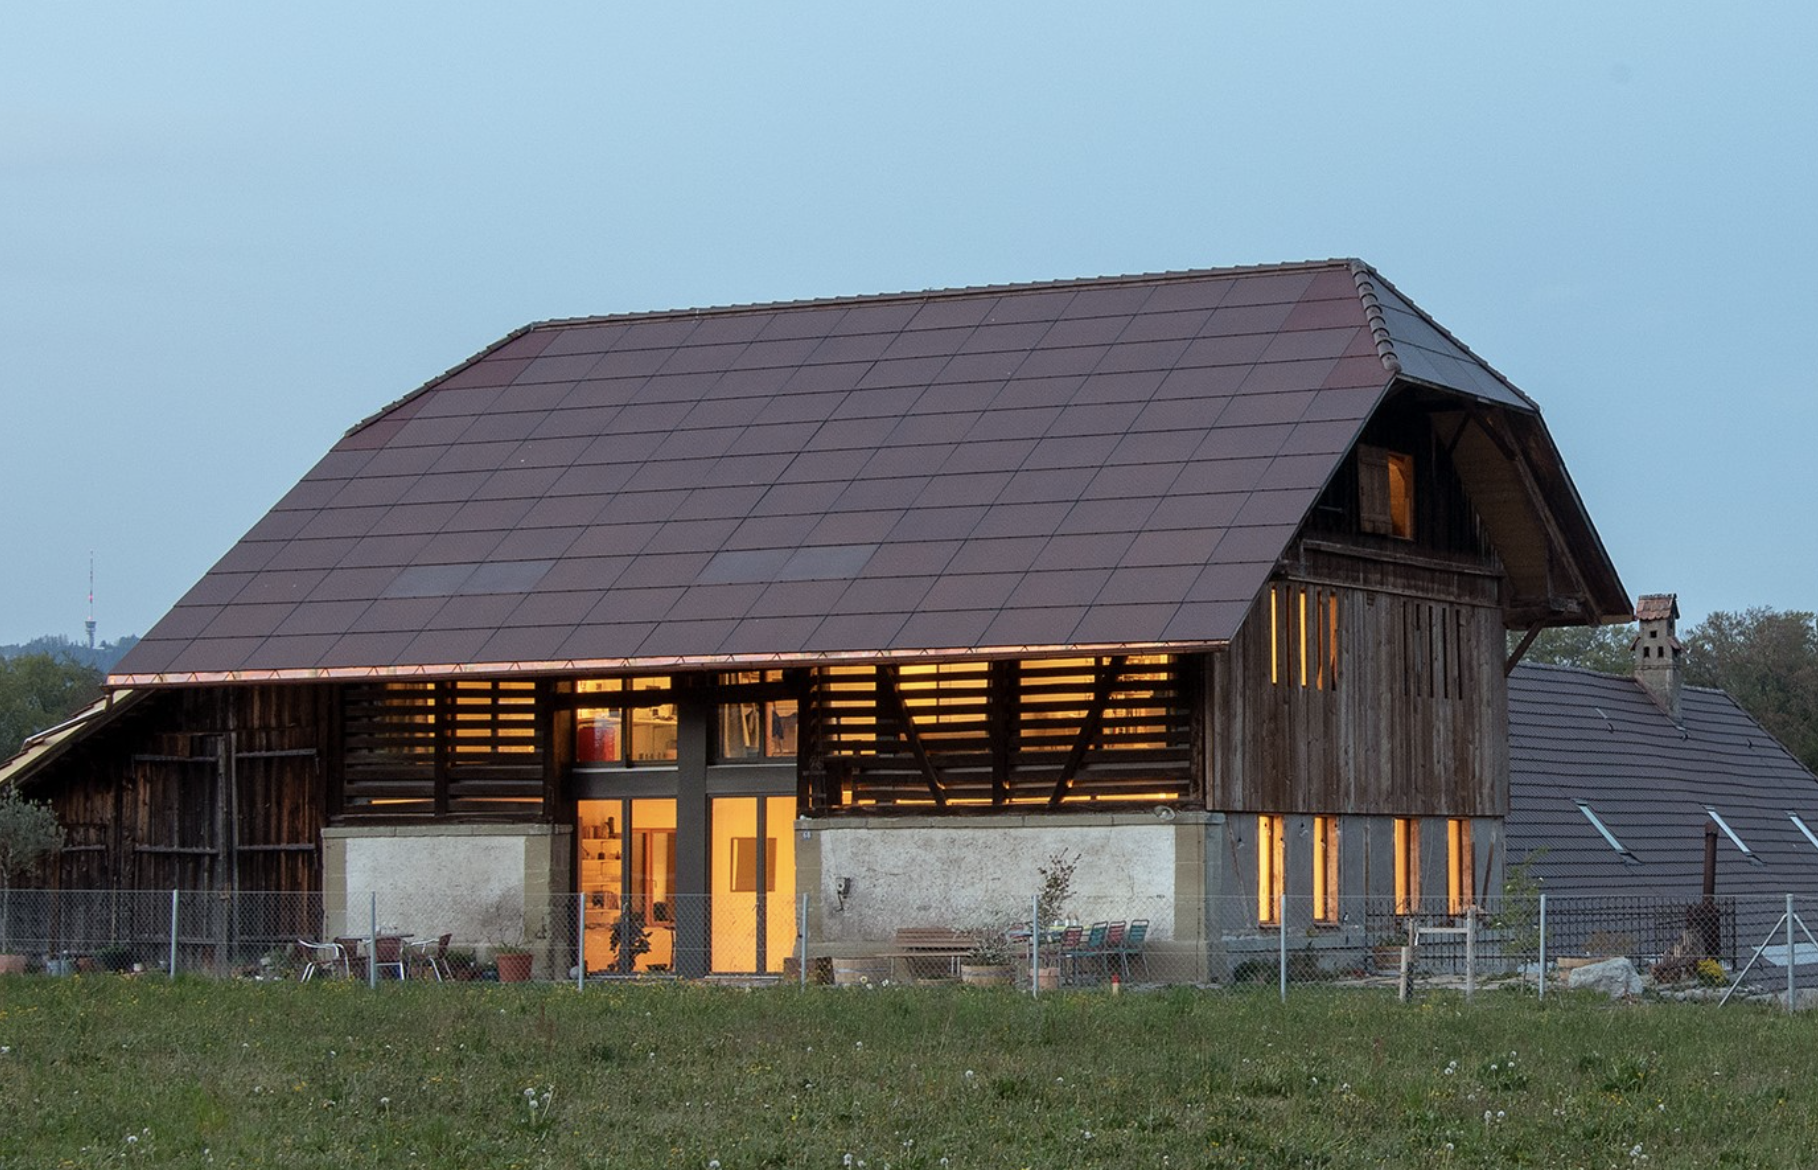 Old farmhouse with solar panels on the roof (Switzerland)